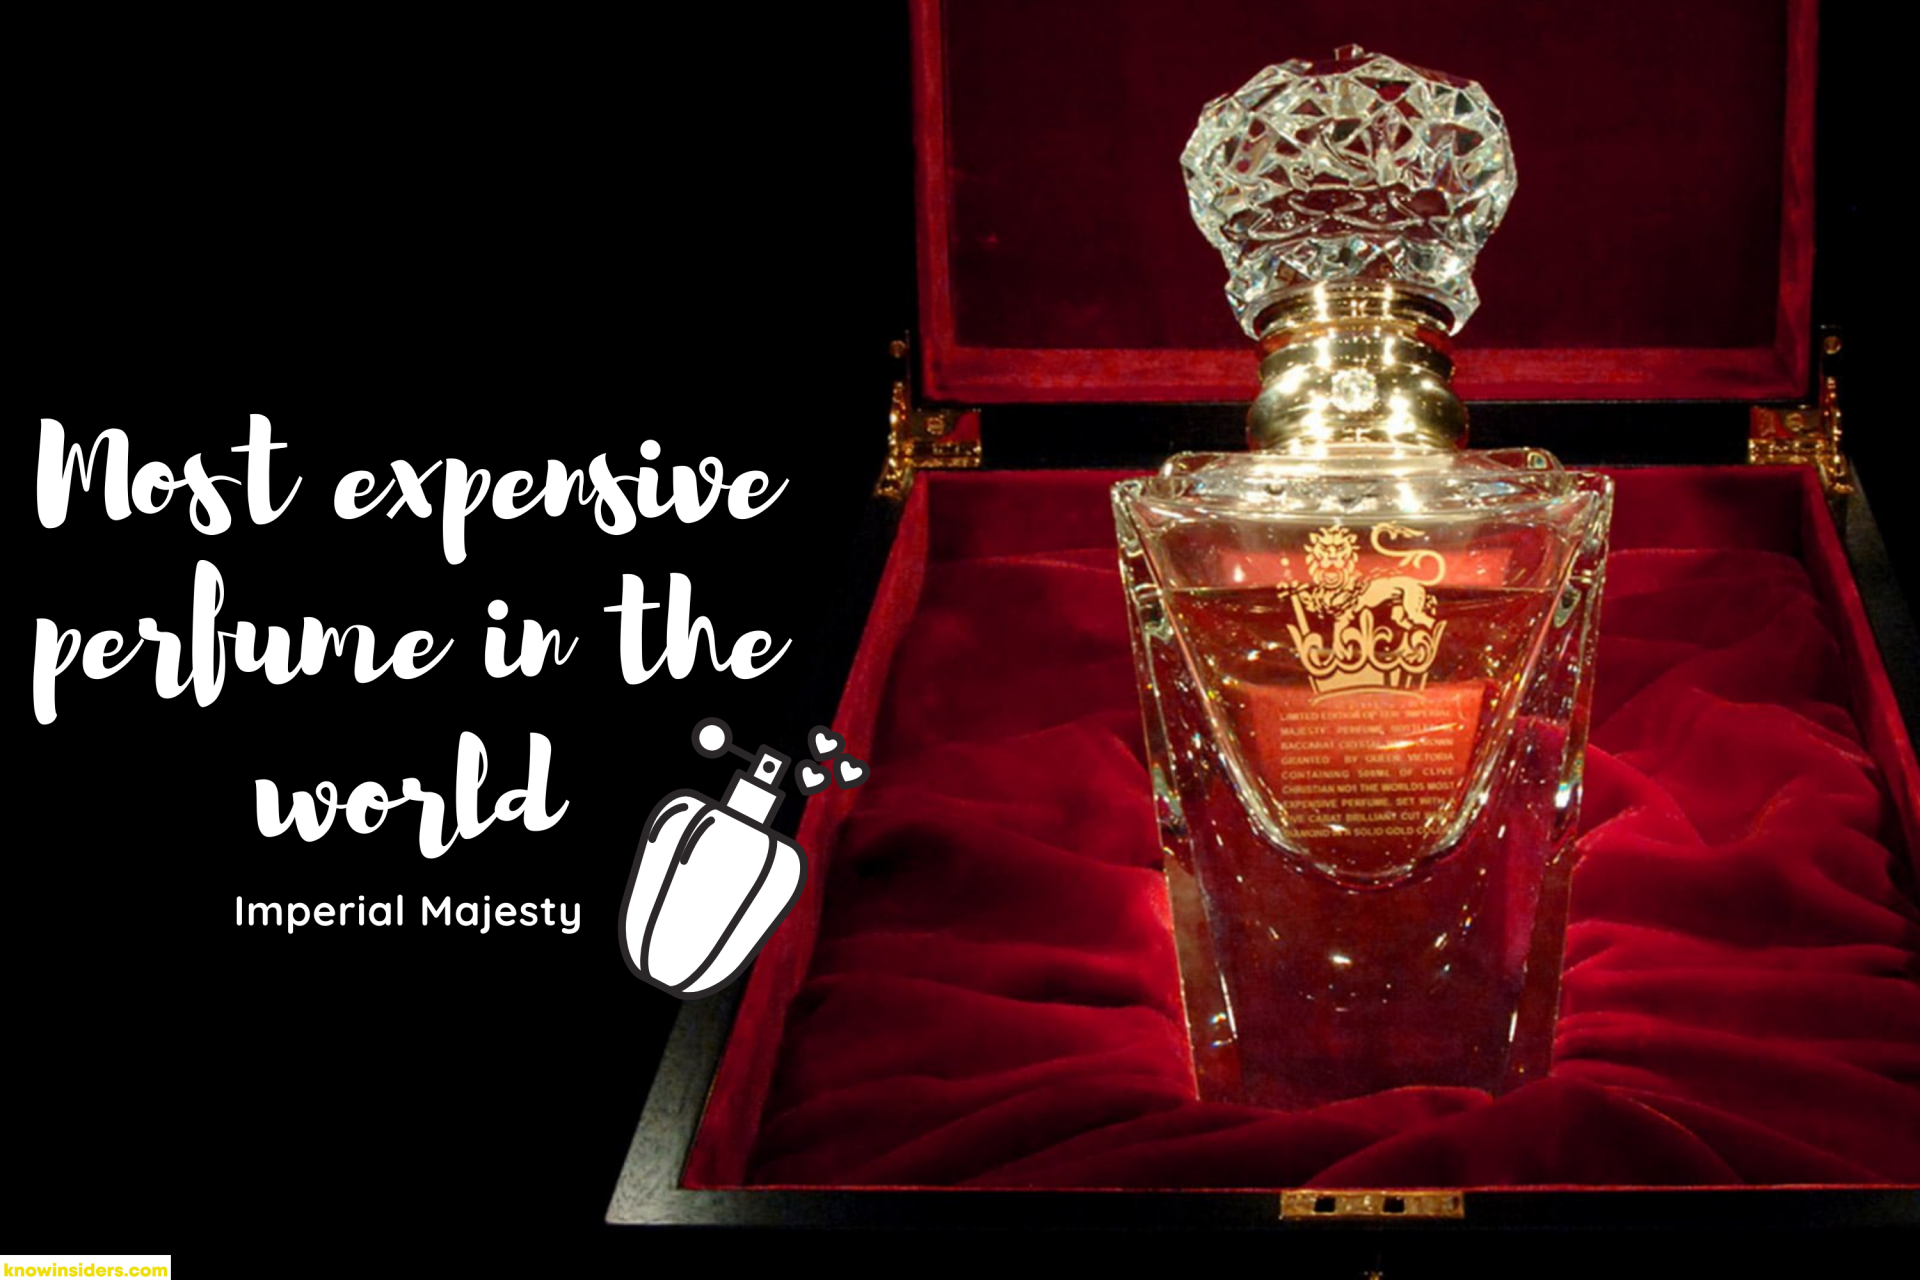 What is Imperial Majesty - the World's Most Expensive Perfume of All Time